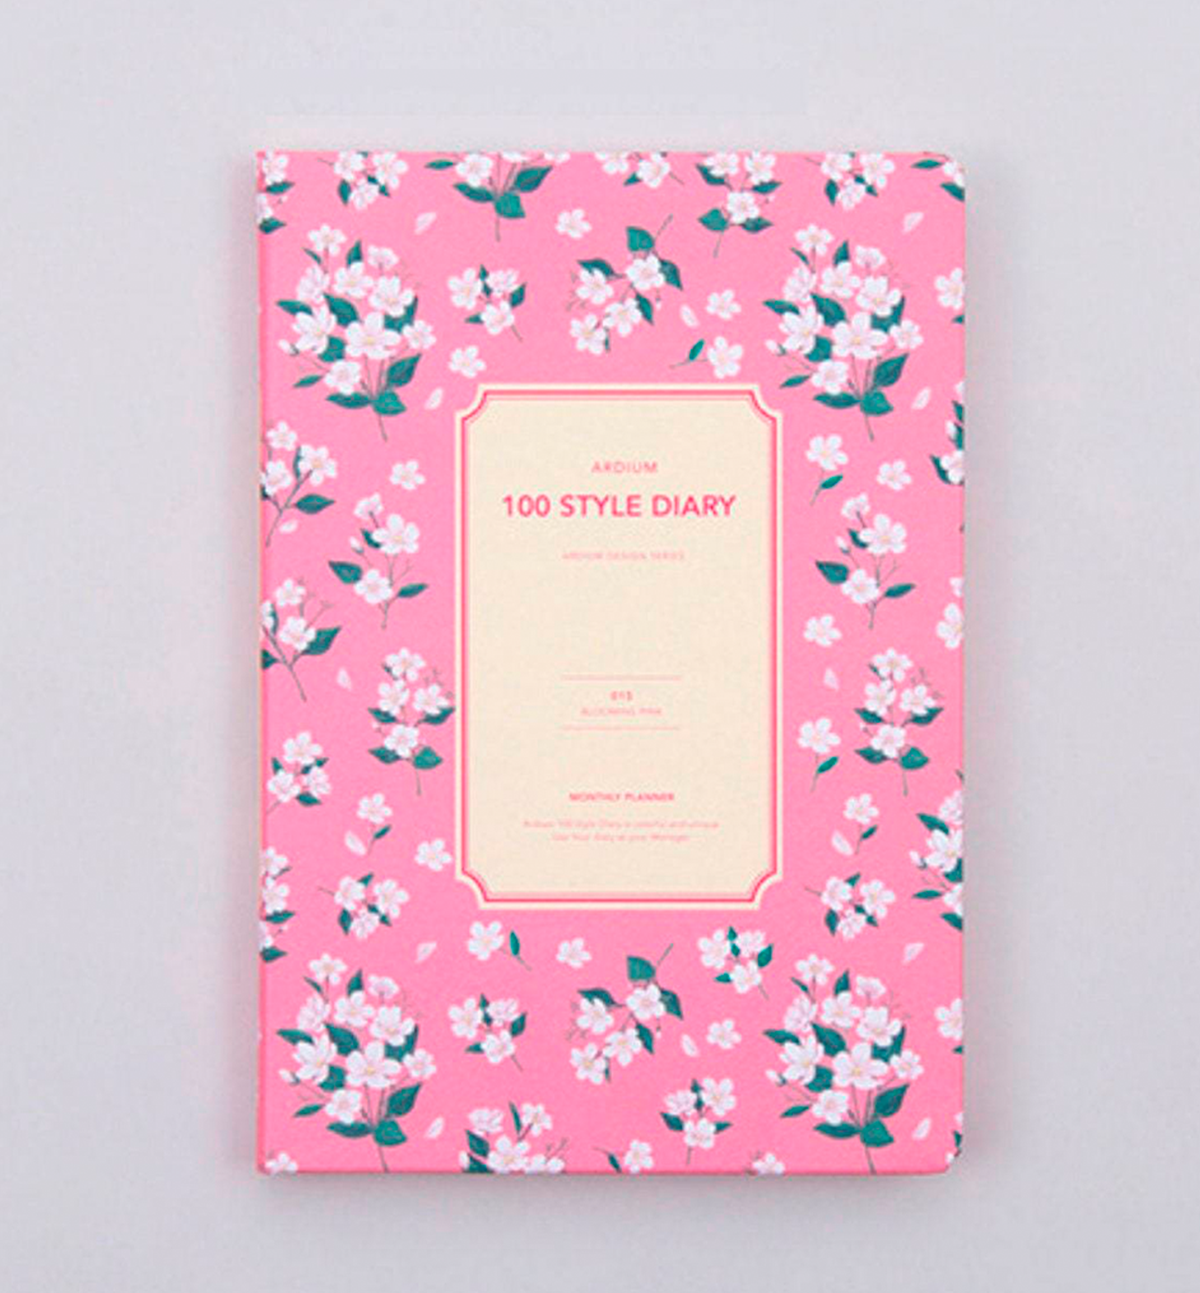 100 Style Diary [Blooming Pink]